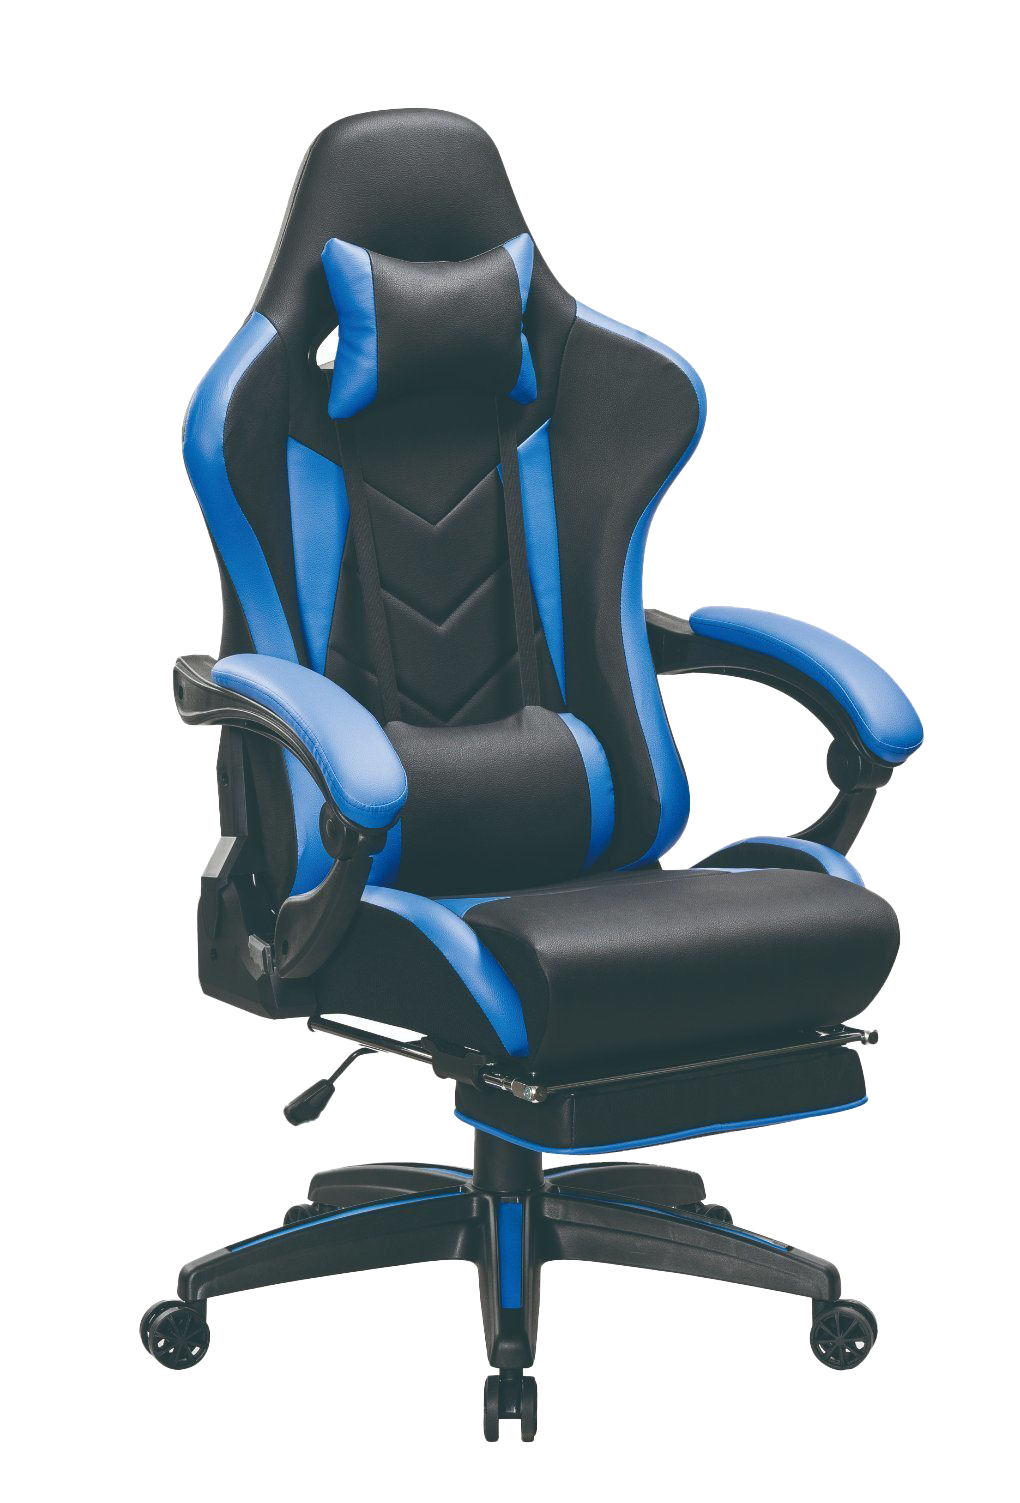 Gaming Chair PNG Transparent Images, Pictures, Photos ...